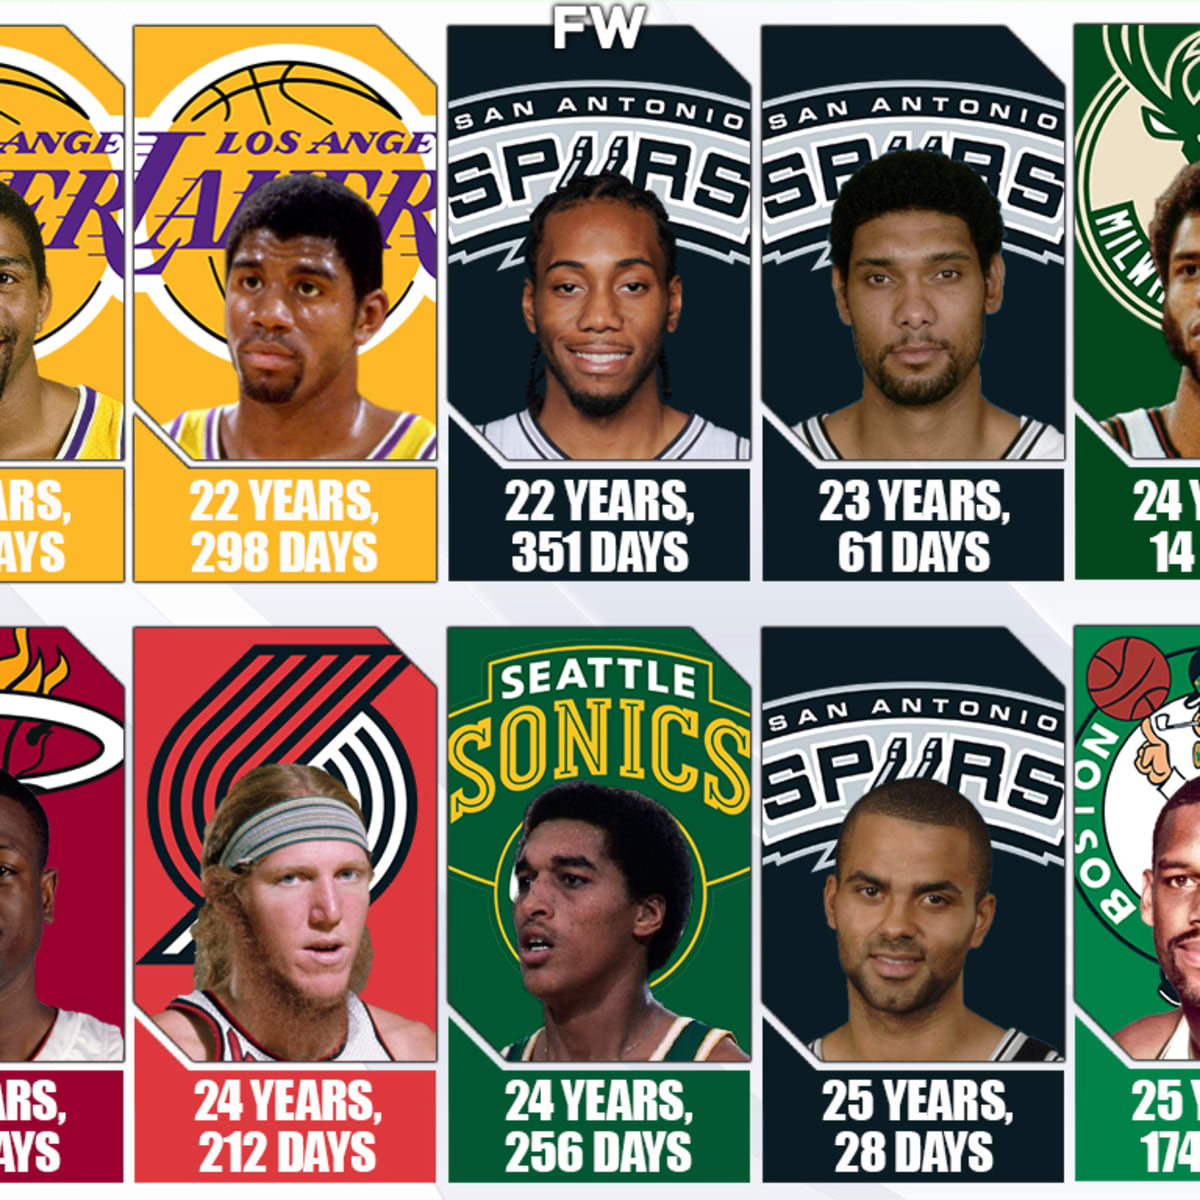 NBA Finals MVP history: The last 20 winners from 2001 to 2020